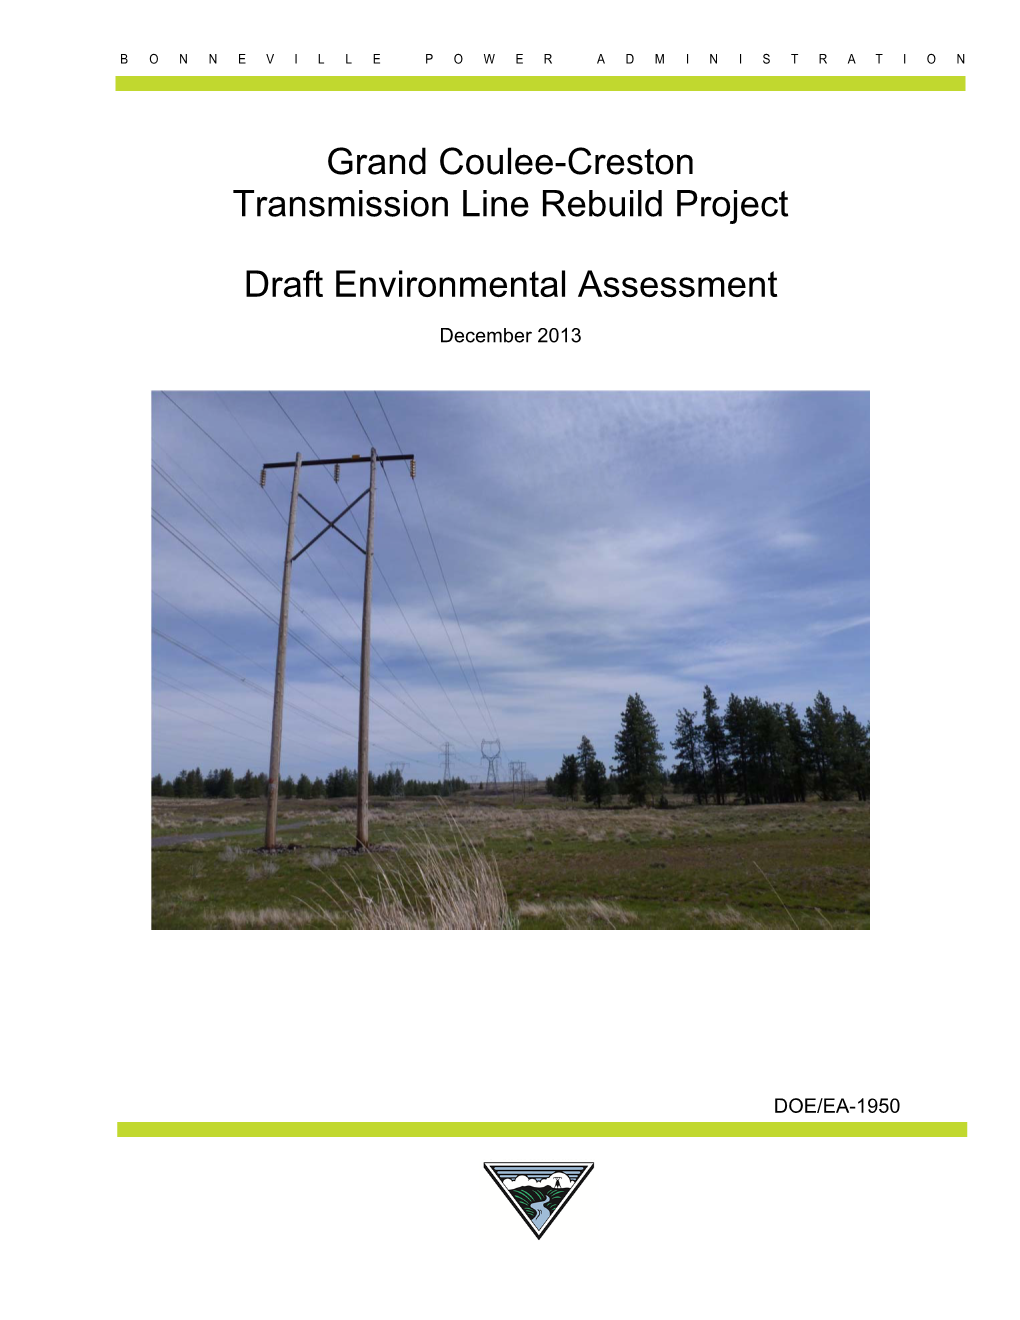 Grand Coulee-Creston Transmission Line Rebuild Project Draft Environmental Assessment 3.11.2 Environmental Consequences—Proposed Action